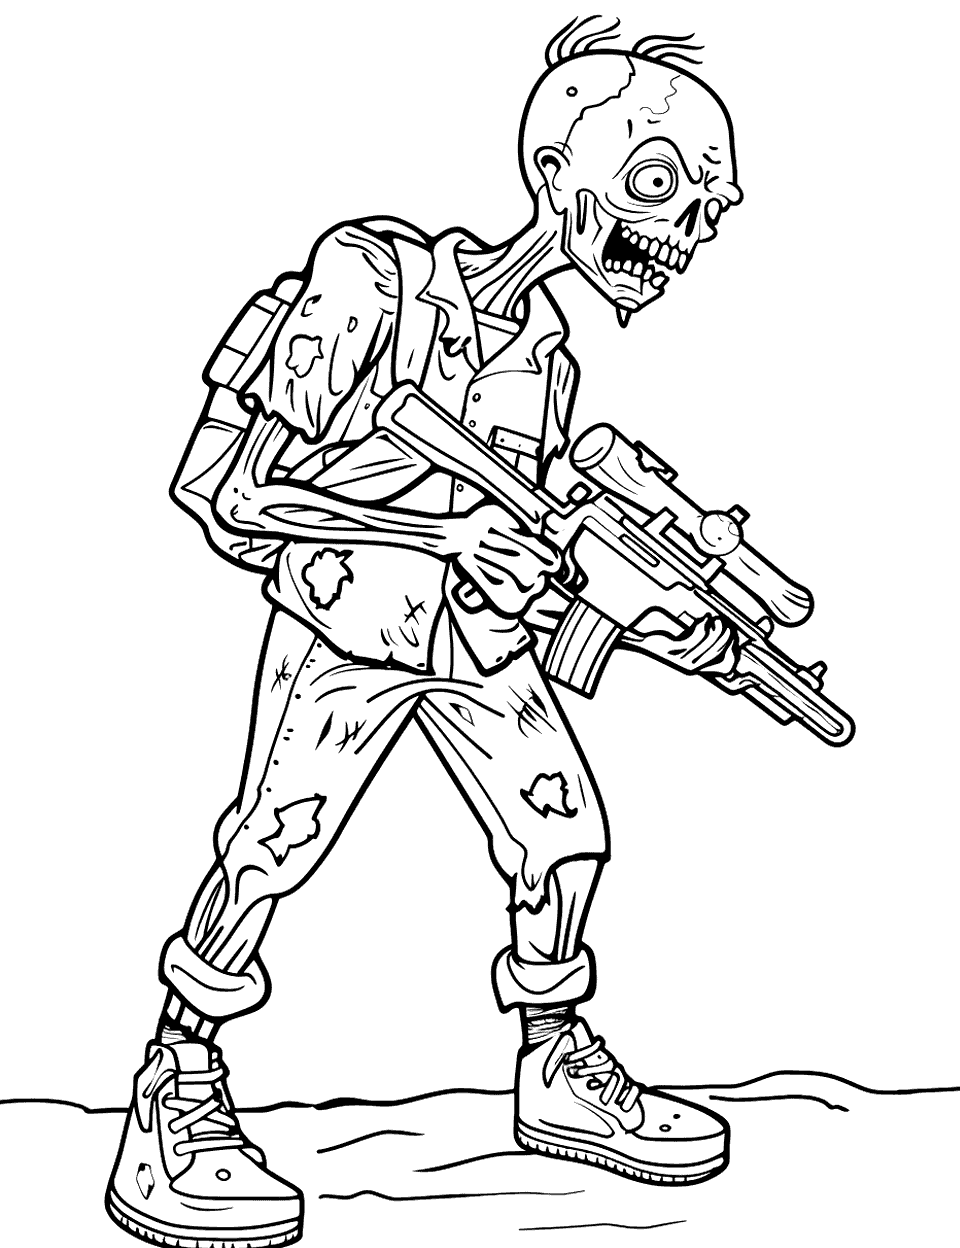 Zombie with a Weapon Coloring Page - A zombie soldier holding a weapon, standing guard.